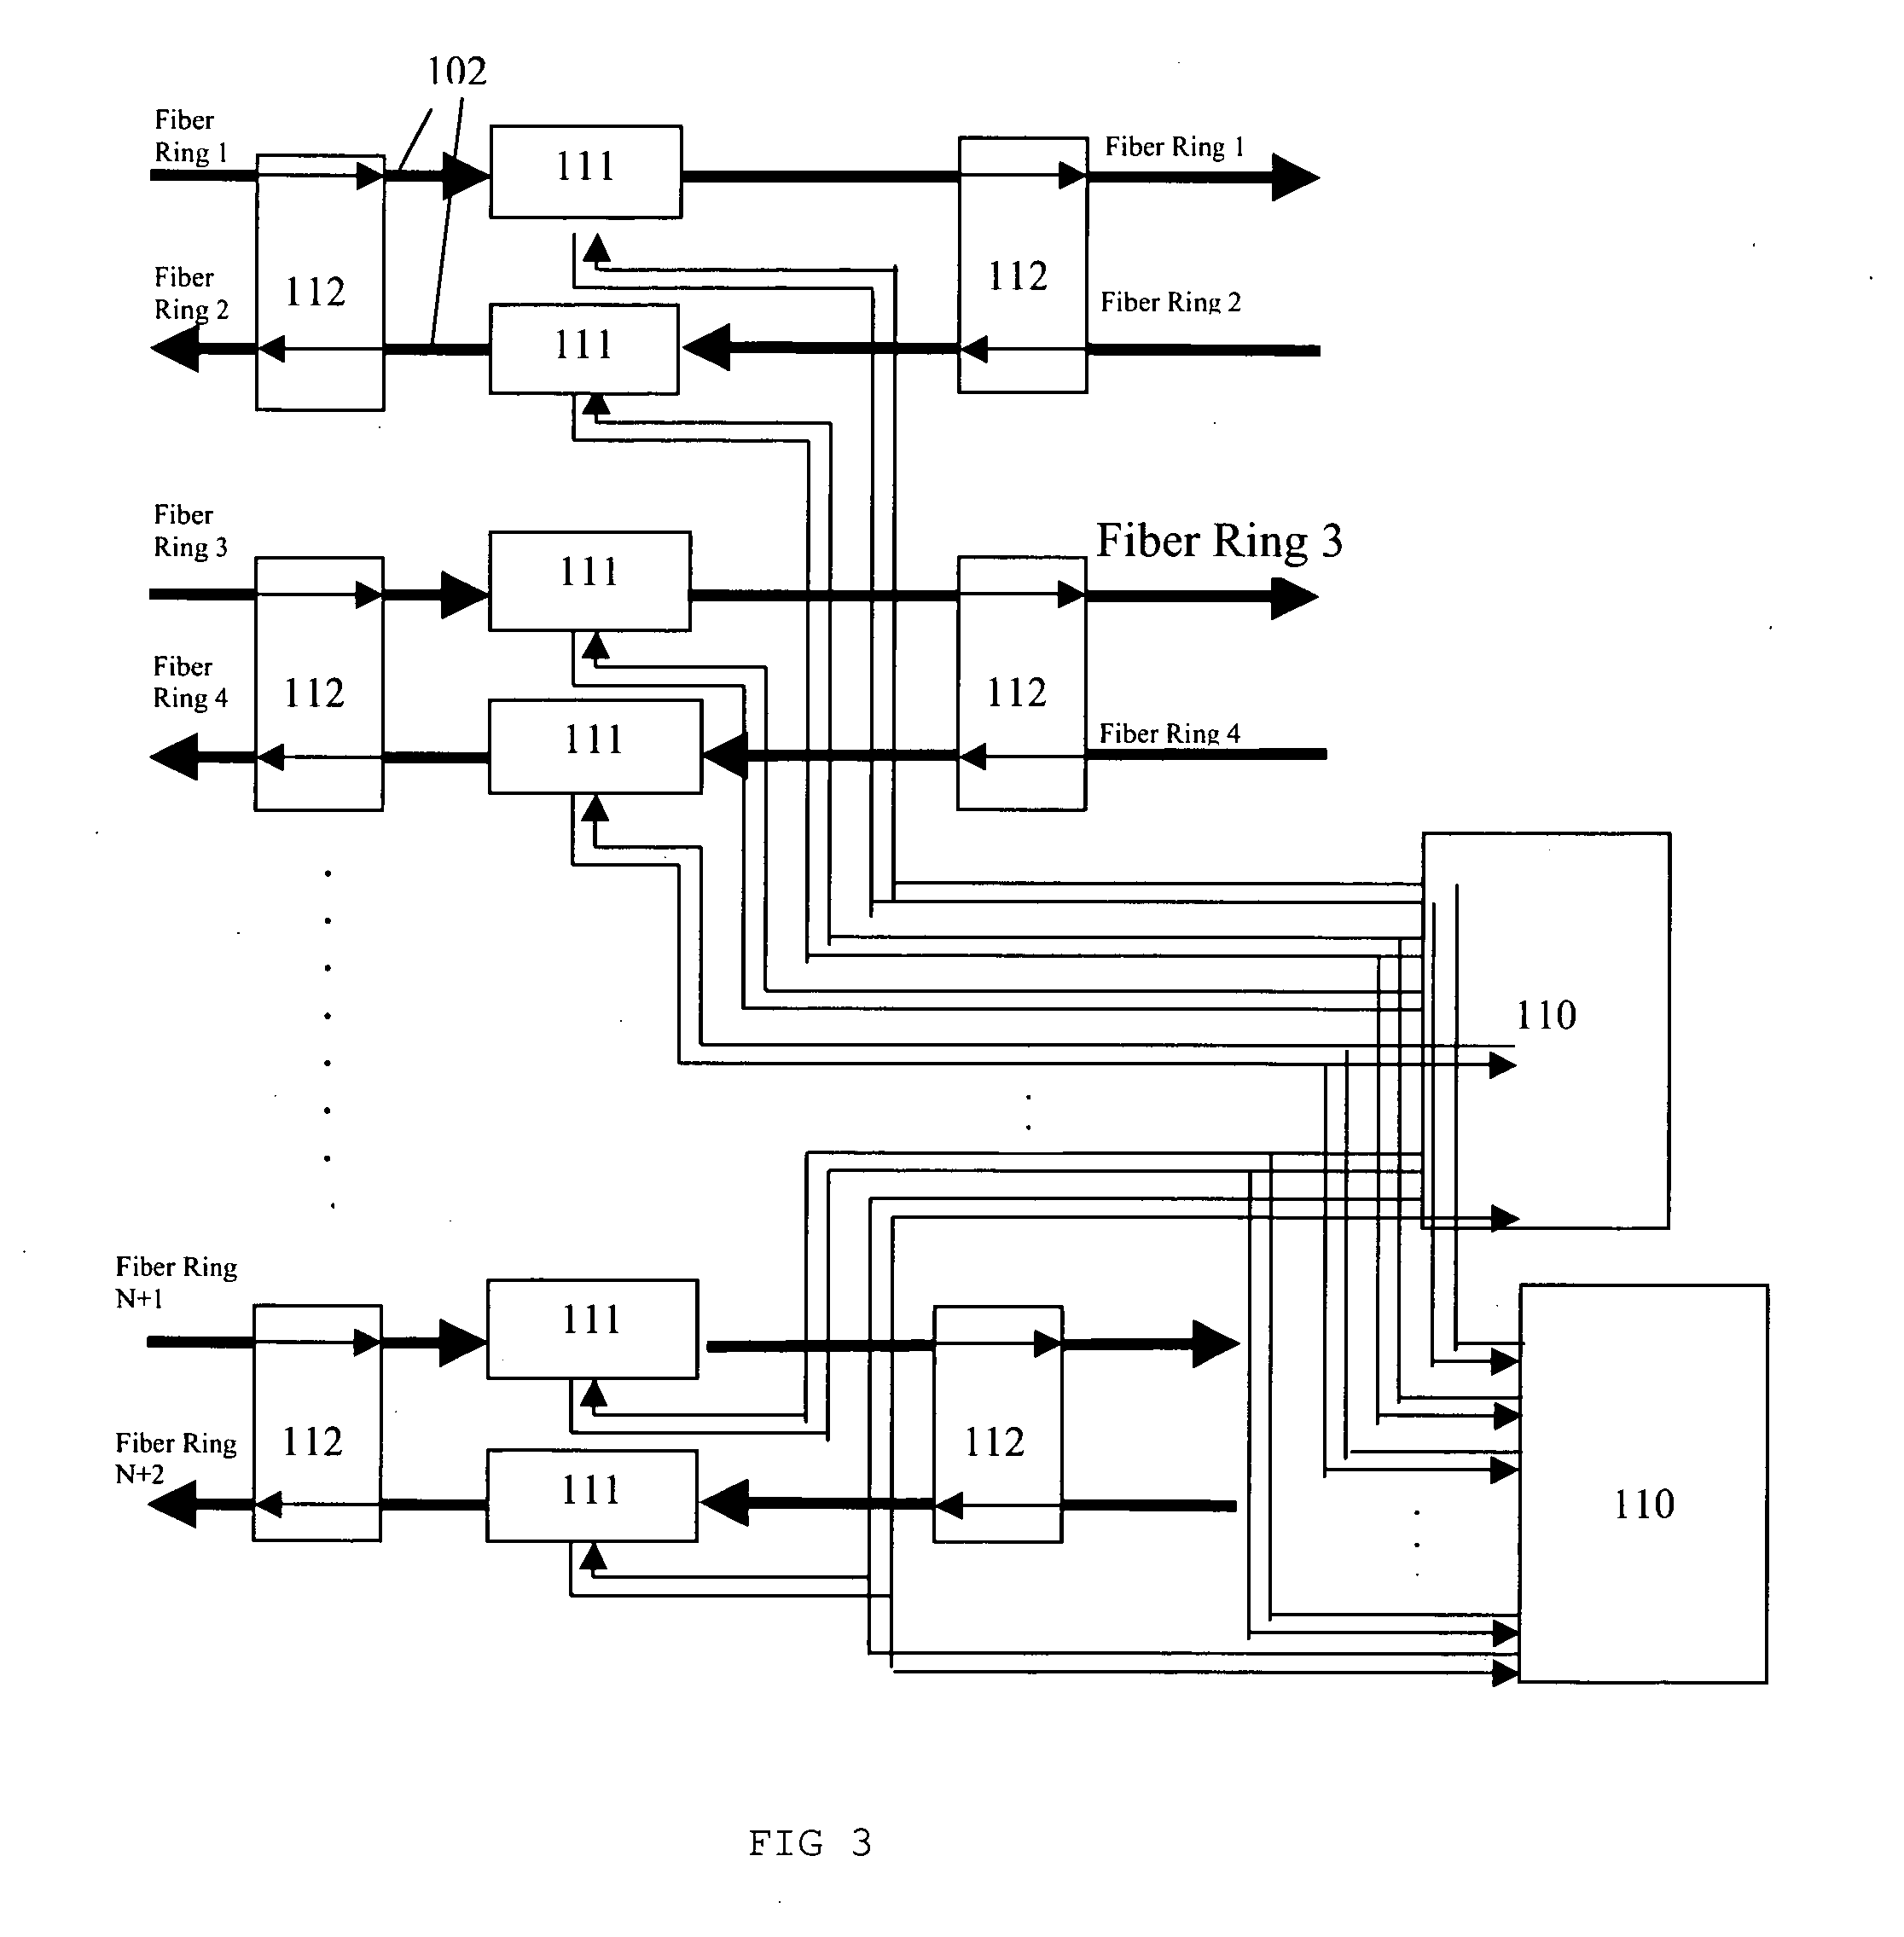 Method and system for enabling recovery of data stored in a computer network; a method and a system for recovering data stored in a computer network